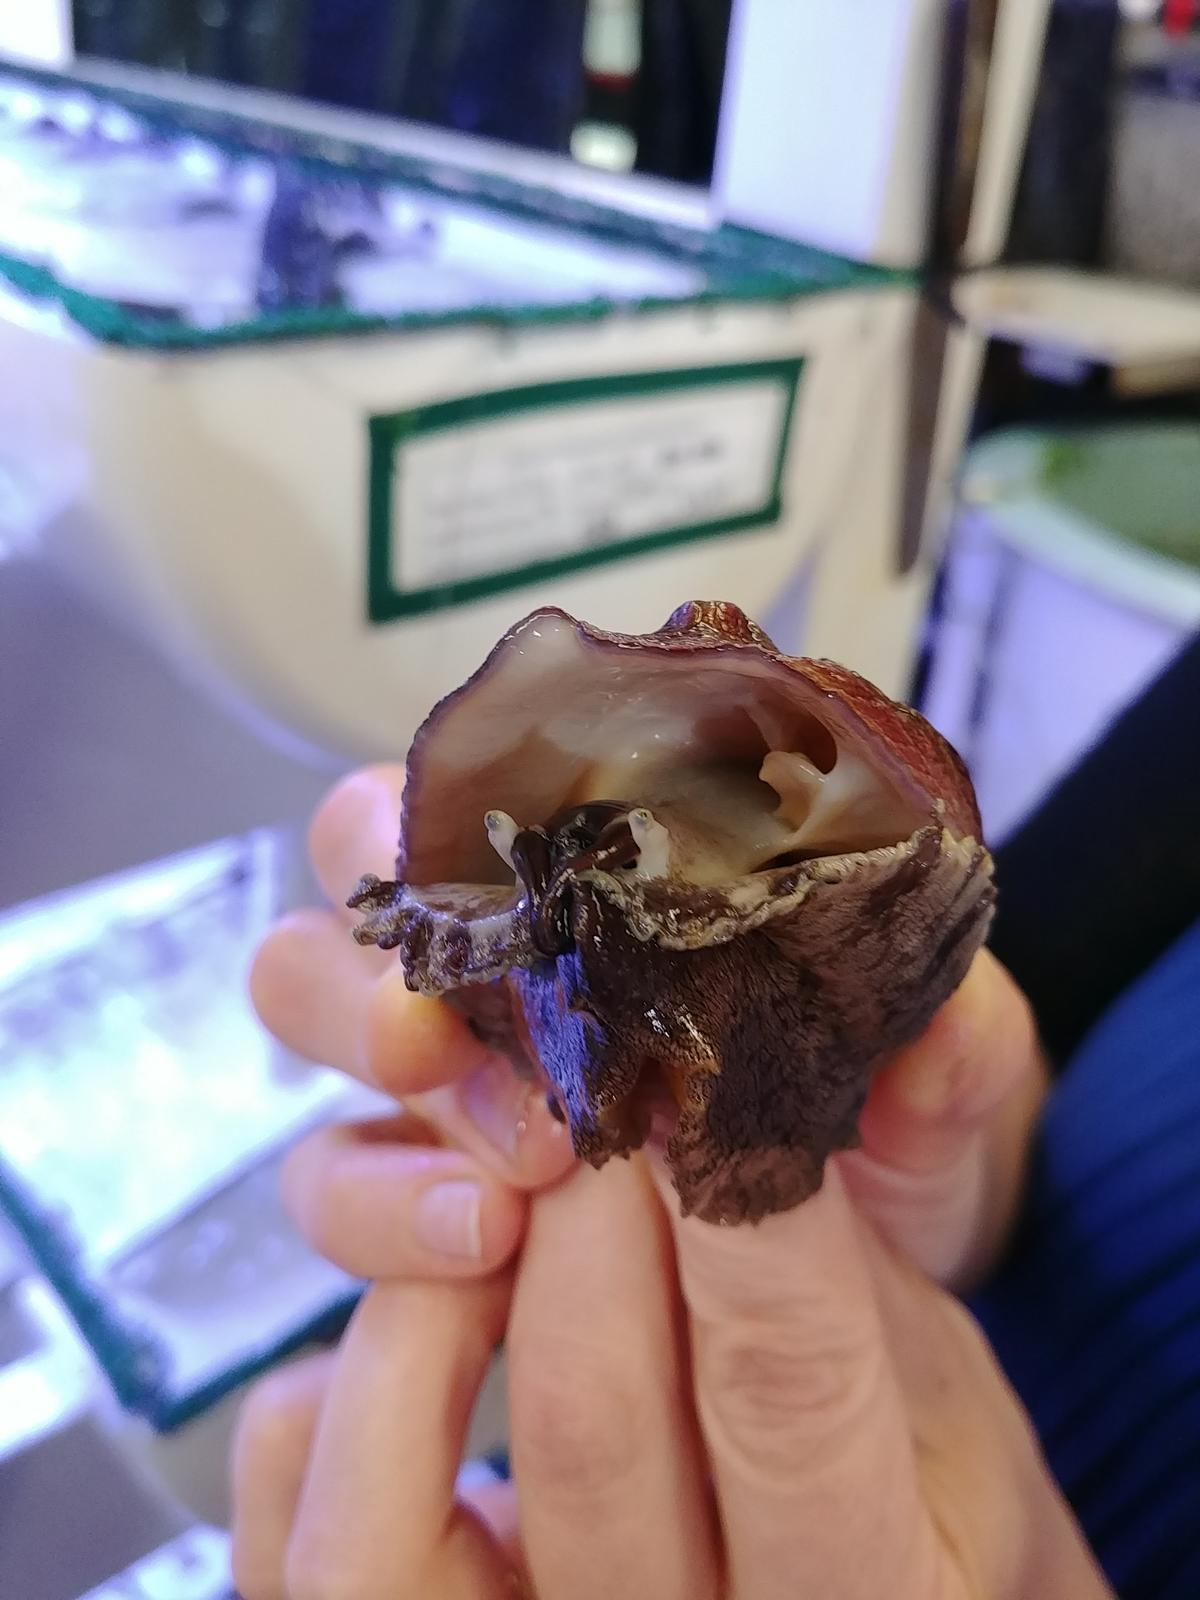 A white abalone emerges from its shell